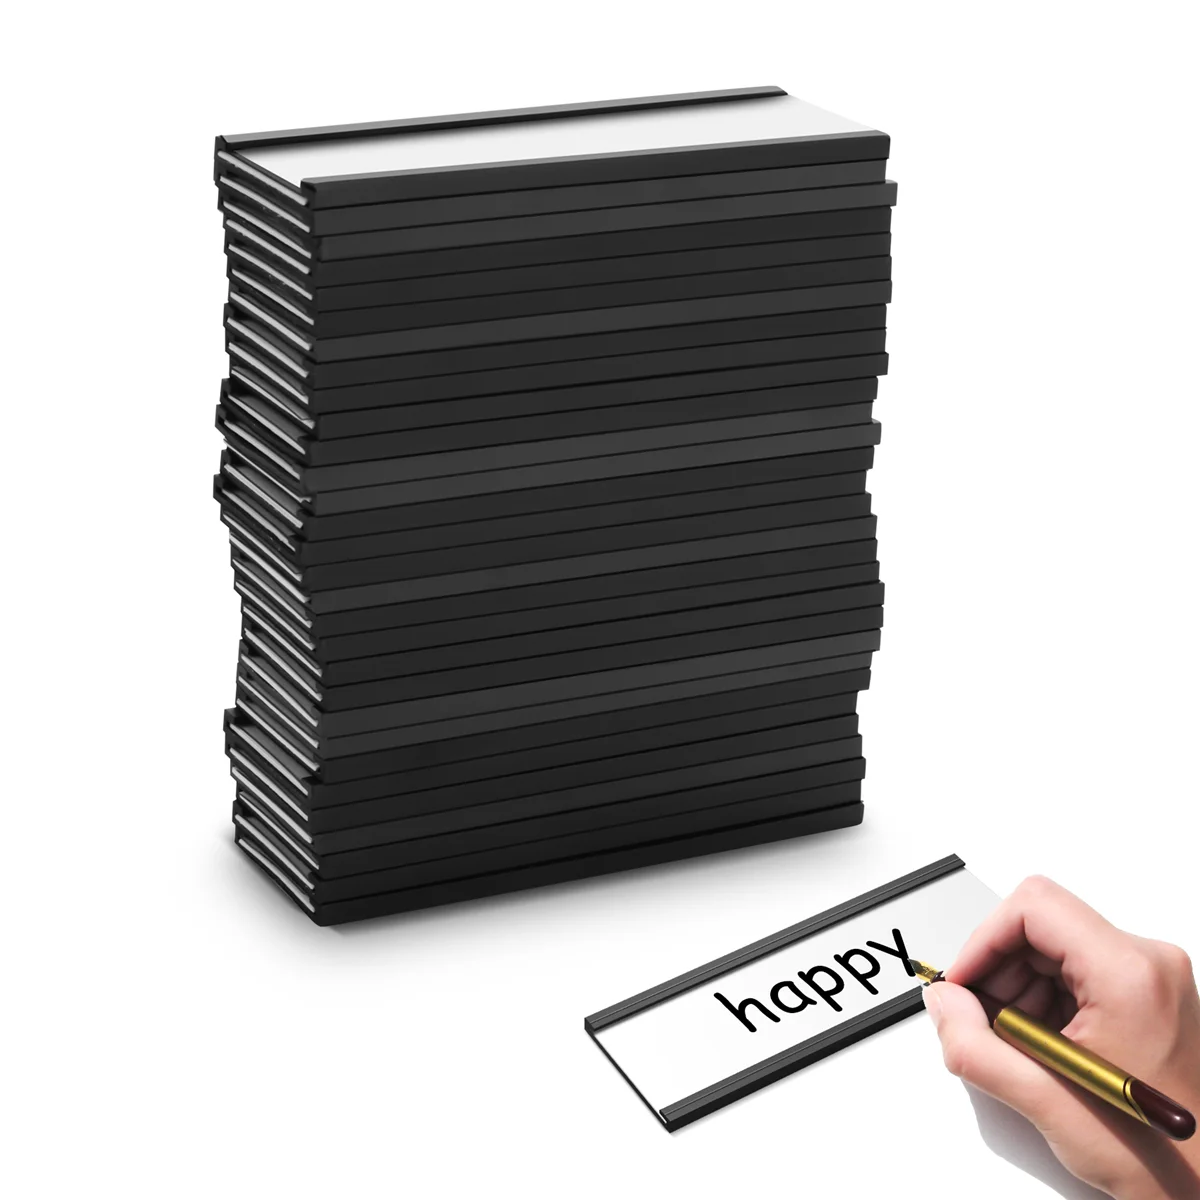 

30Pcs Magnetic Label Holders with Magnetic Data Card Holders with Clear Plastic Protectors for Metal Shelf (1 x 3 Inch)